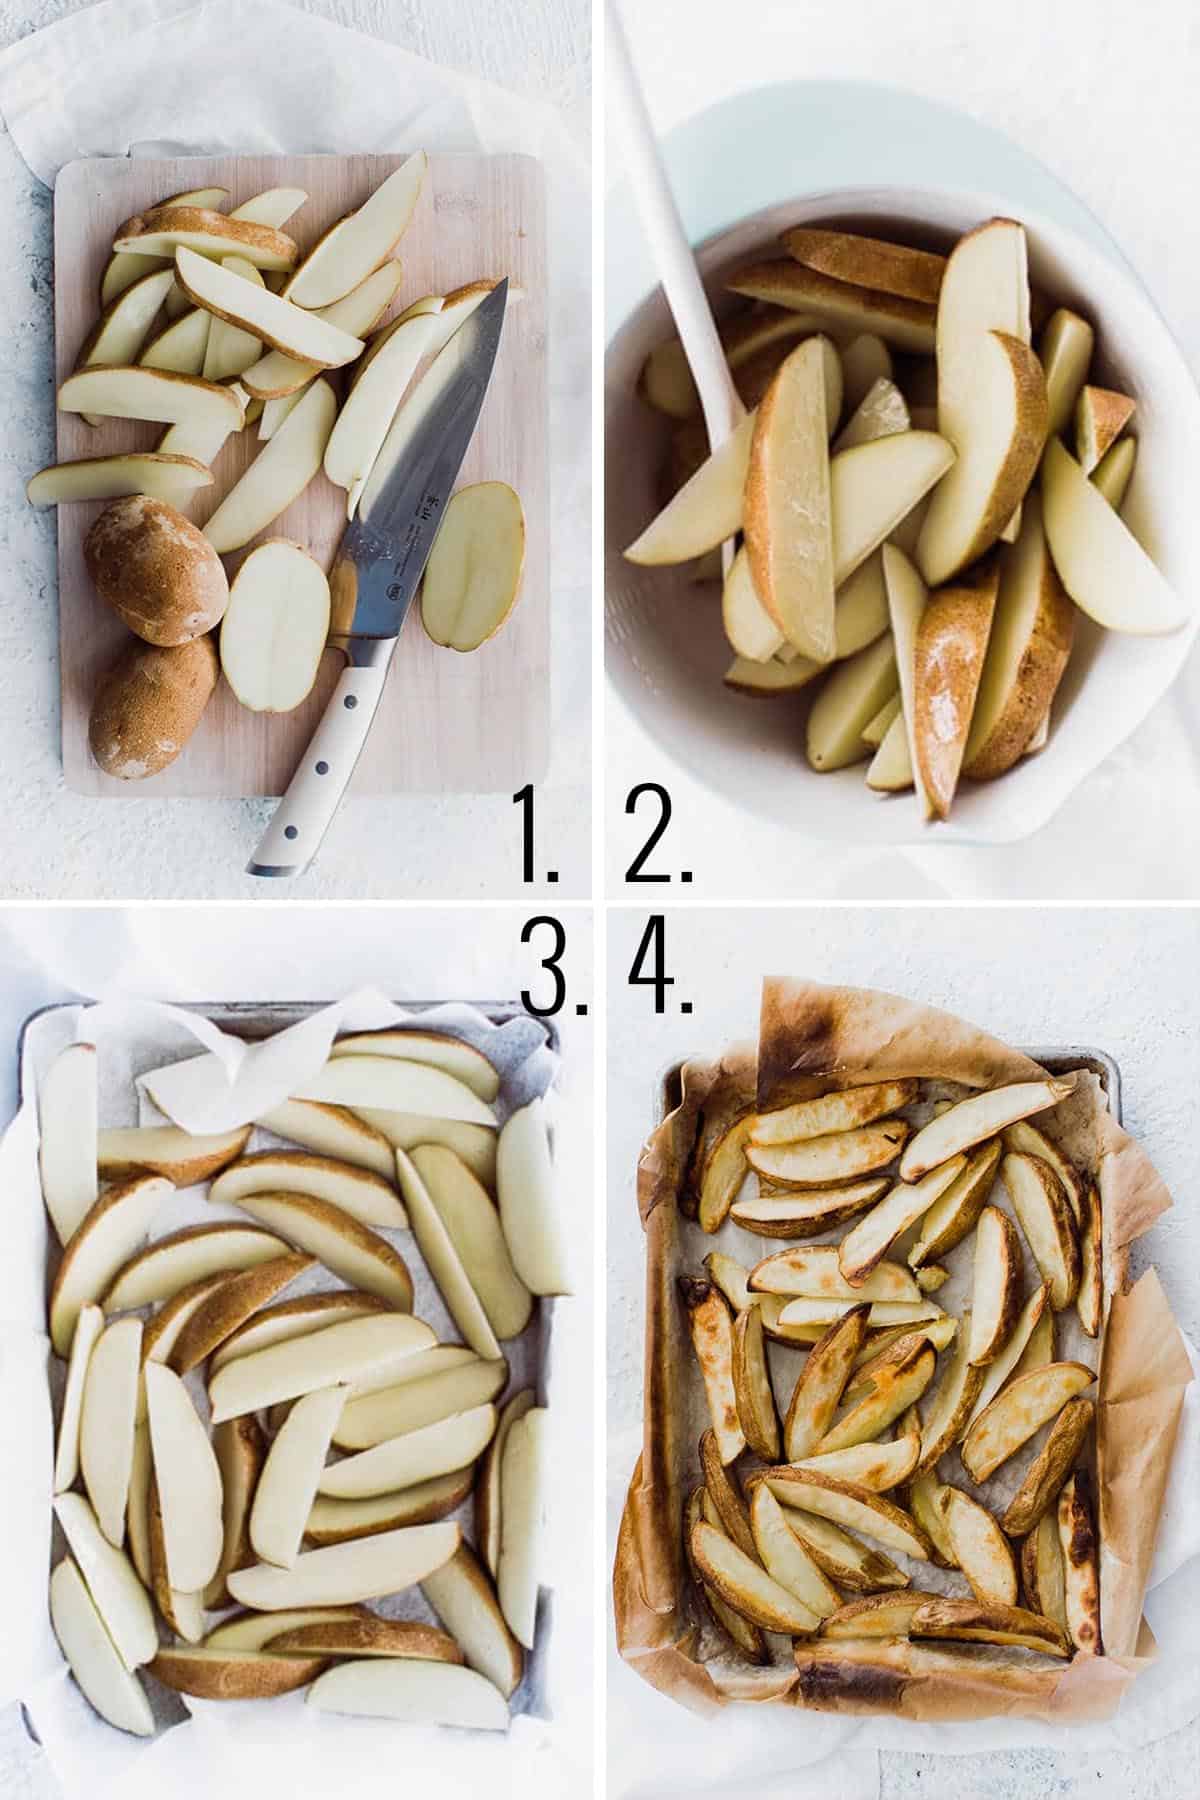 Collage of making the potato wedges from cutting to baking in the oven.